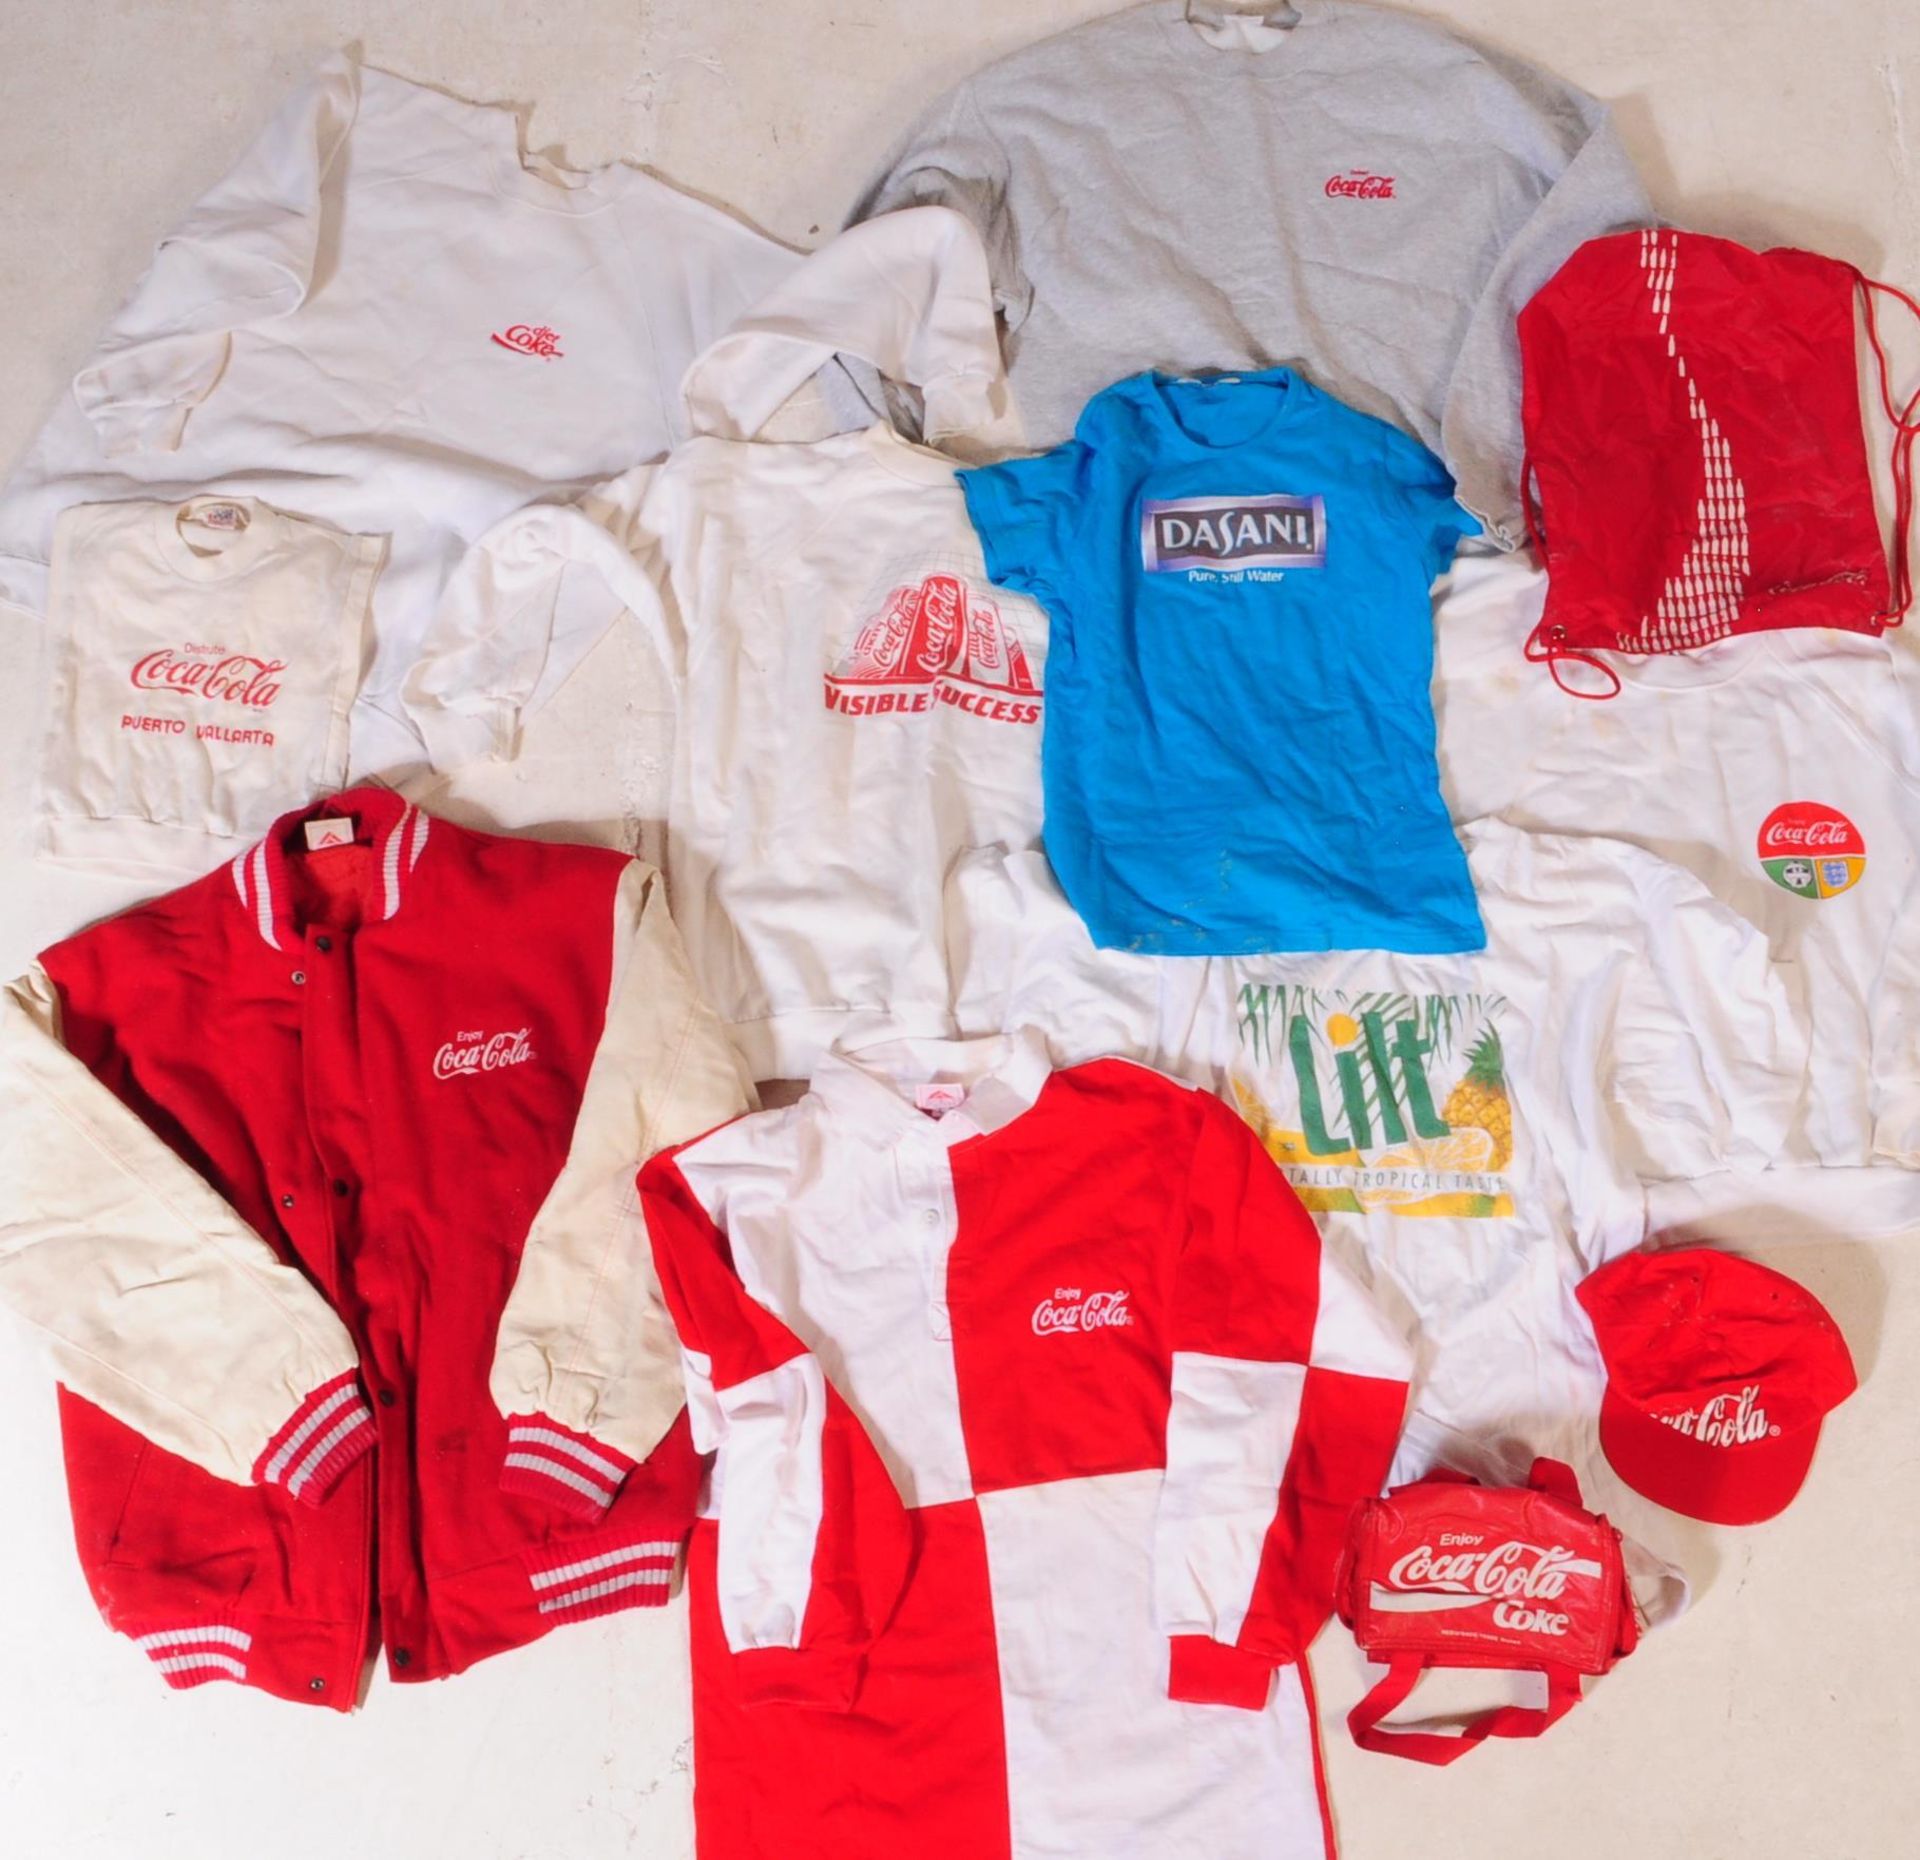 LARGE COLLECTION OF VINTAGE COCA COLA CLOTHING - Image 2 of 5